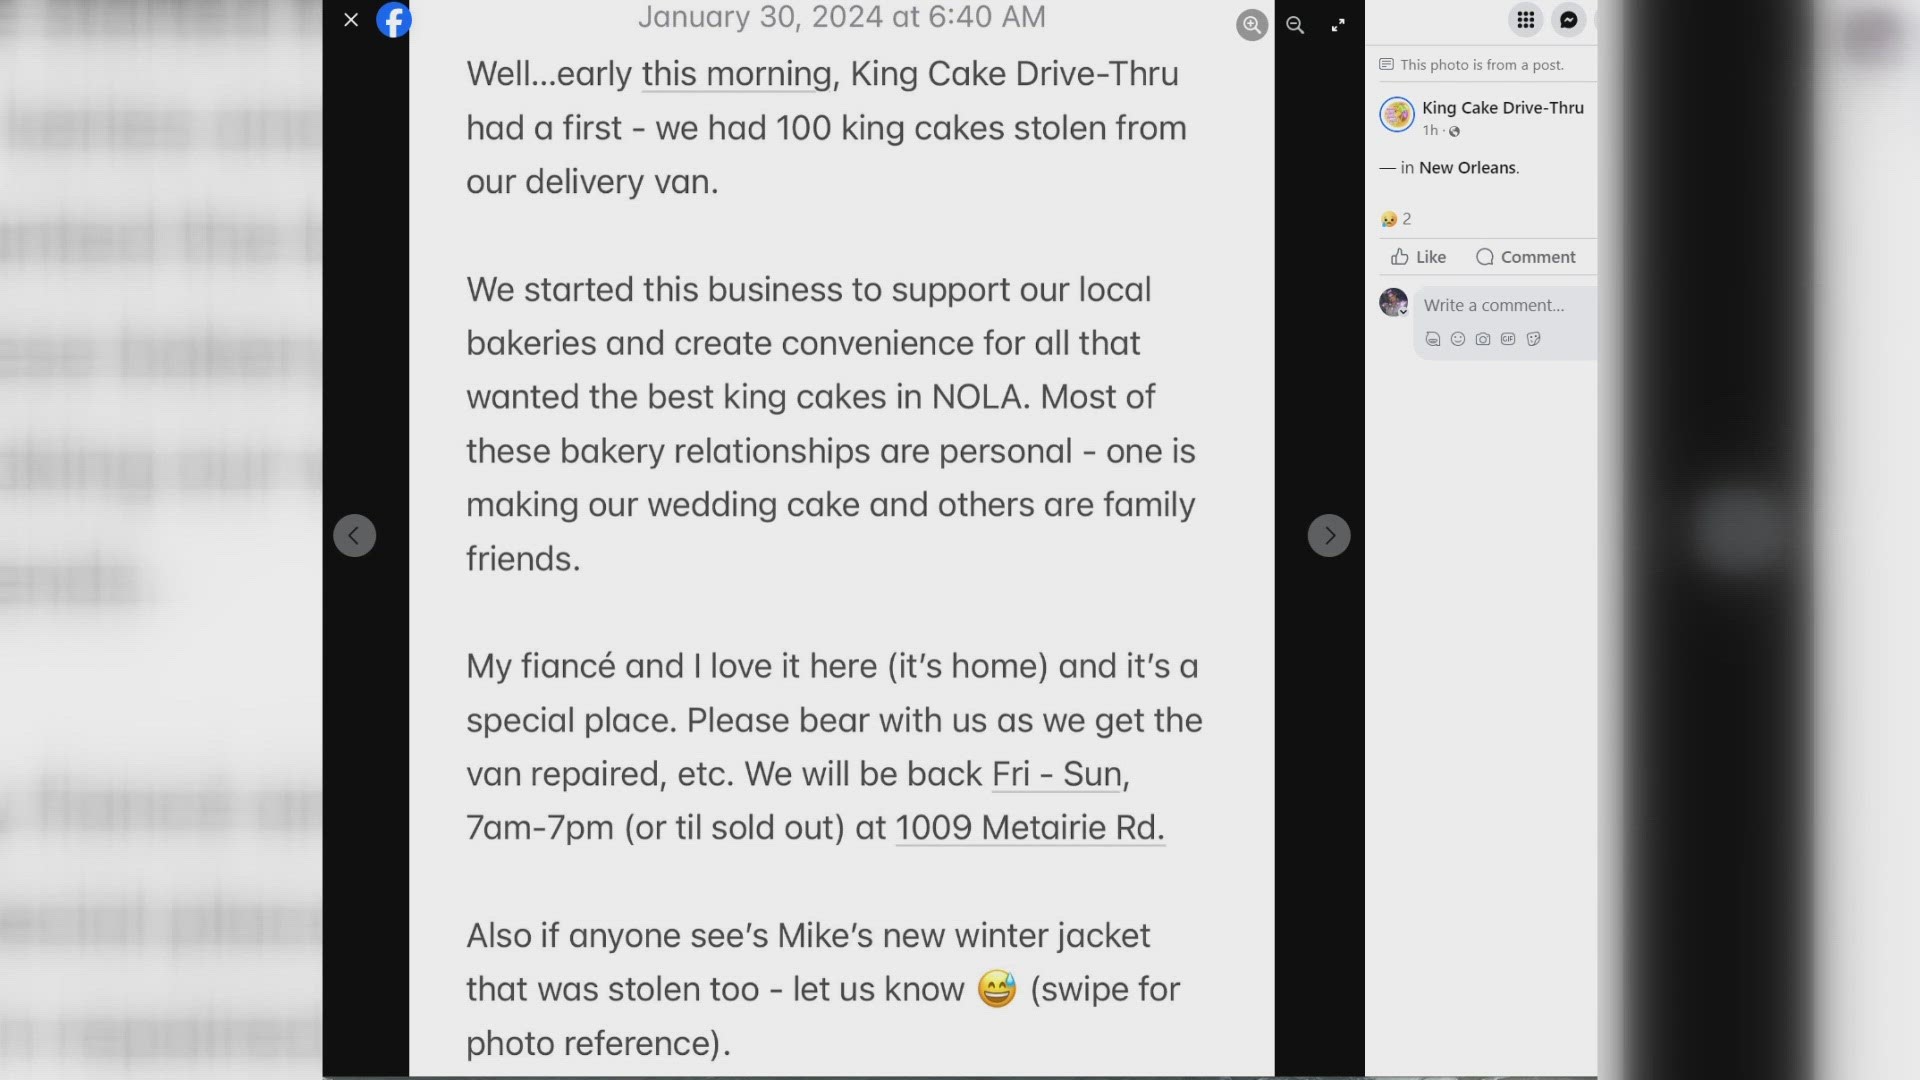 Thief steals 100 king cakes.